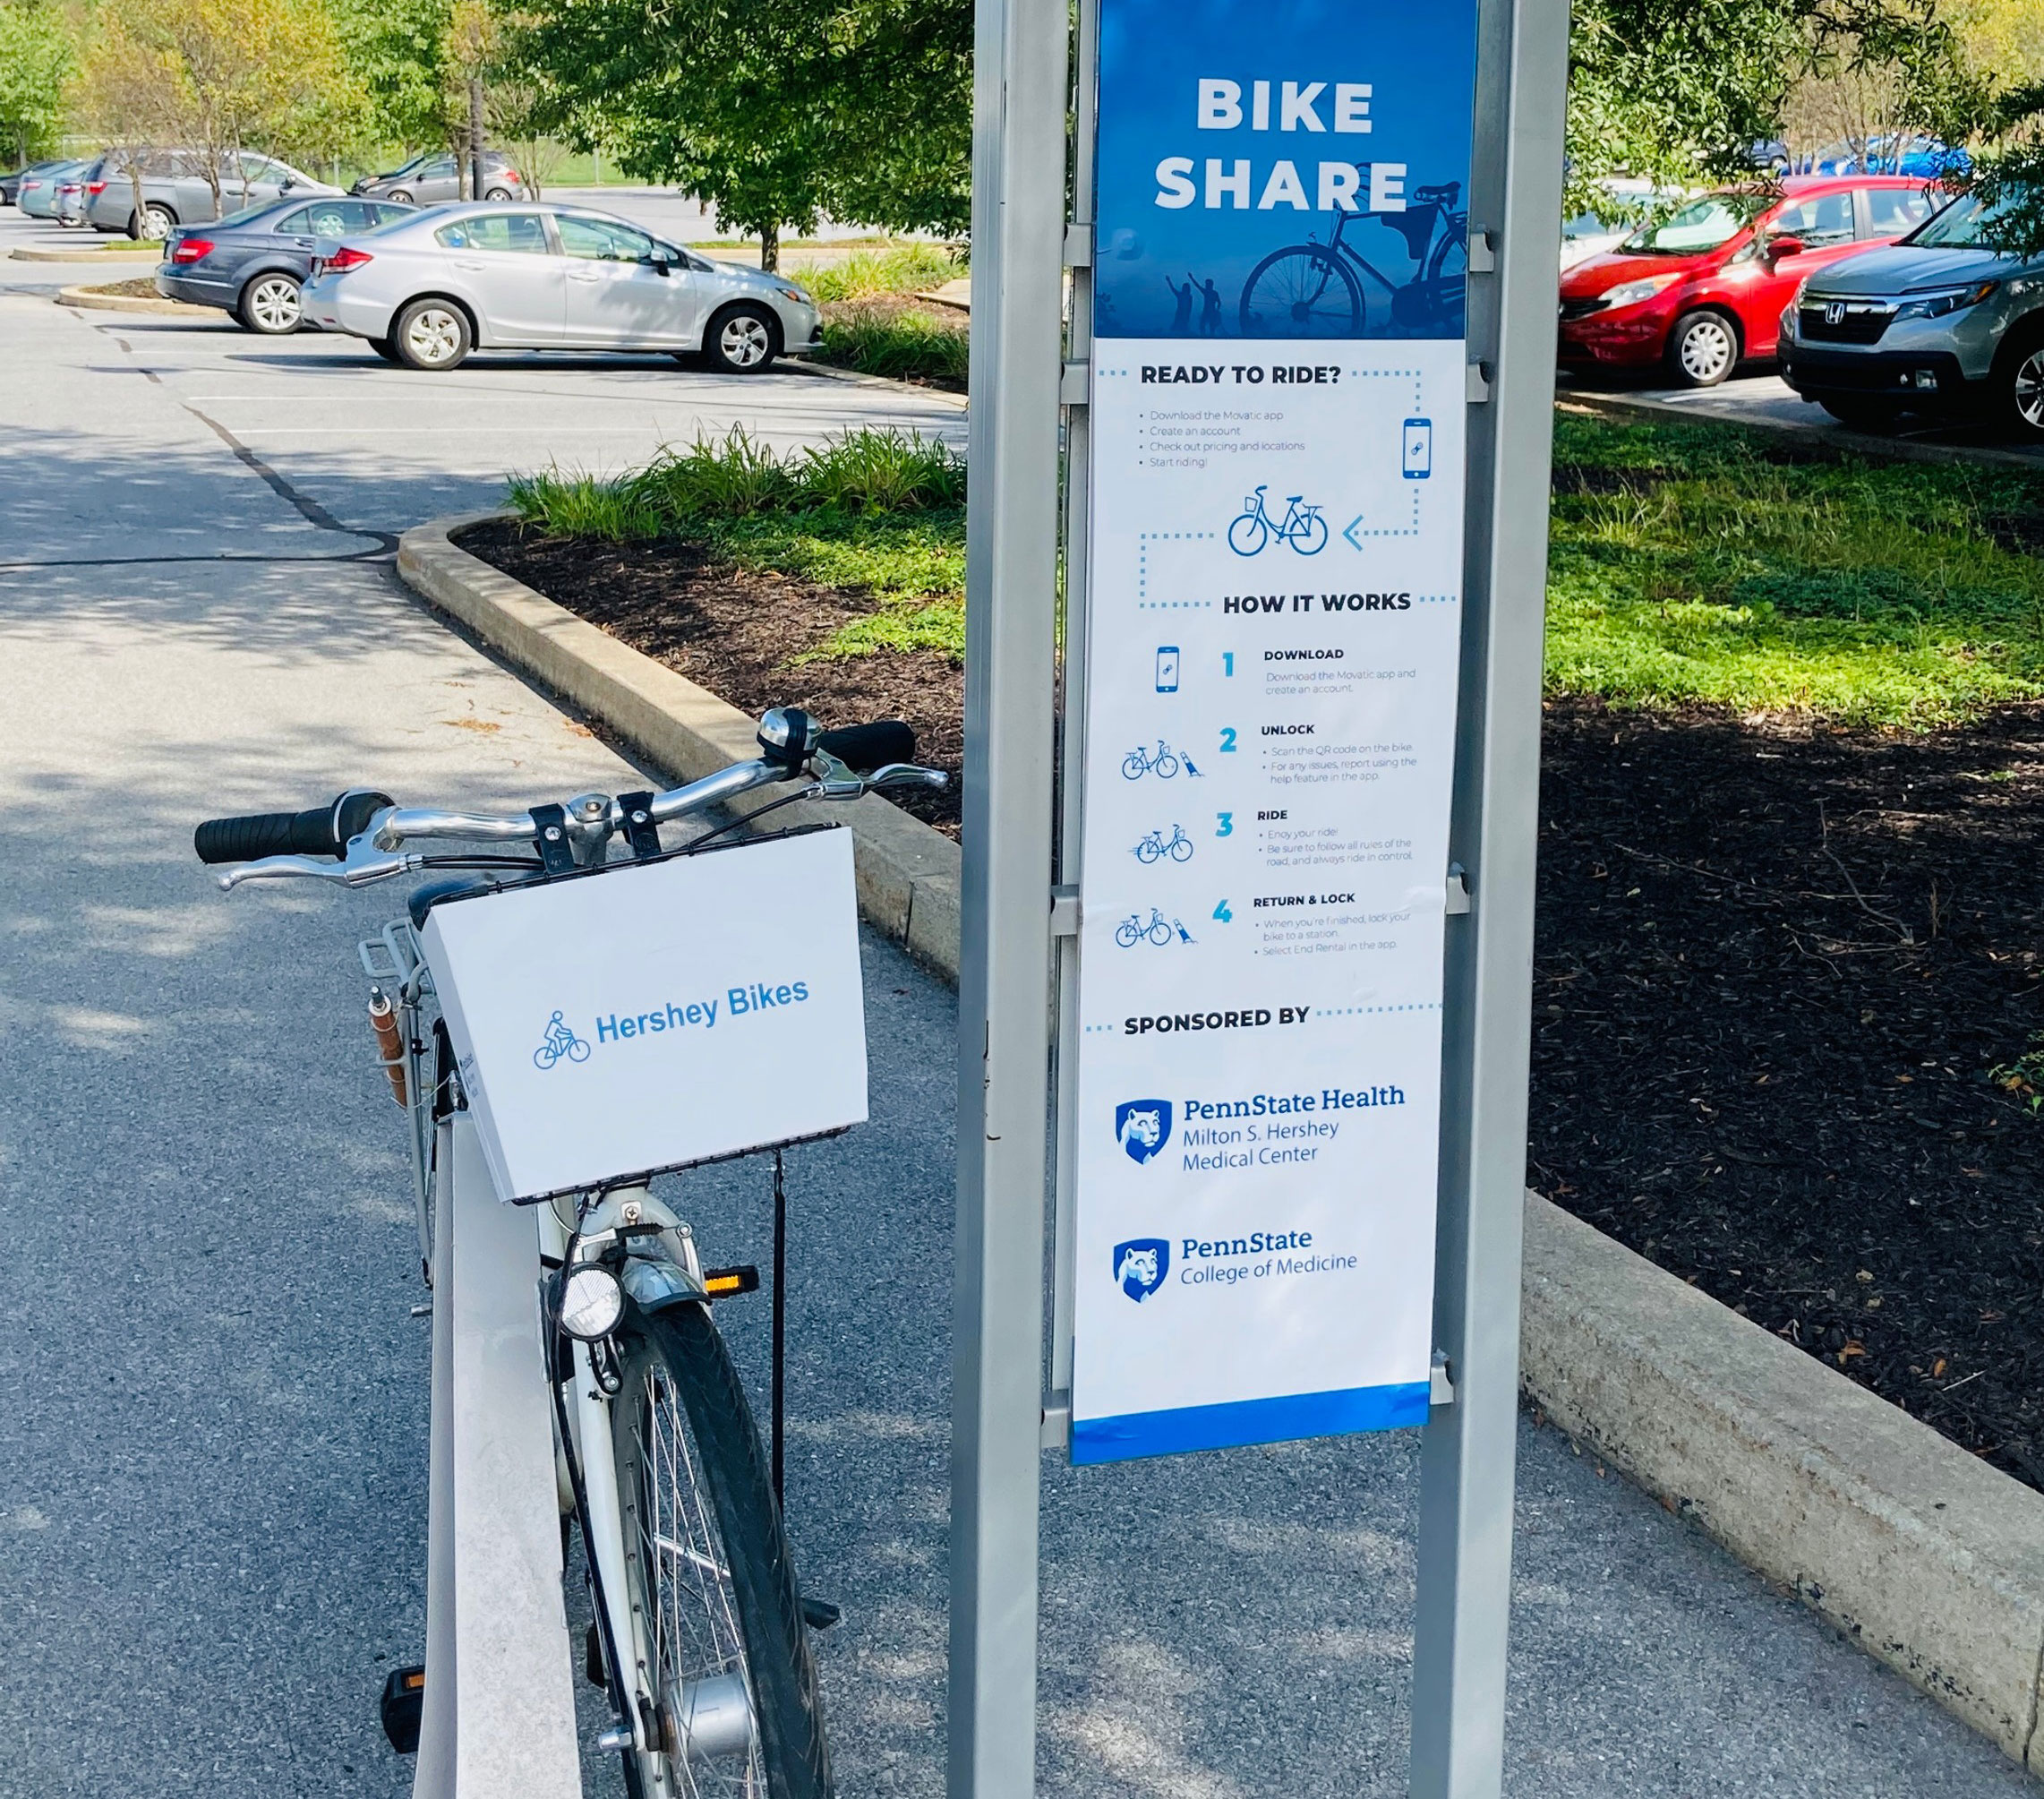 A bicycle is seen on a rack next to a sign describing the bike share program.